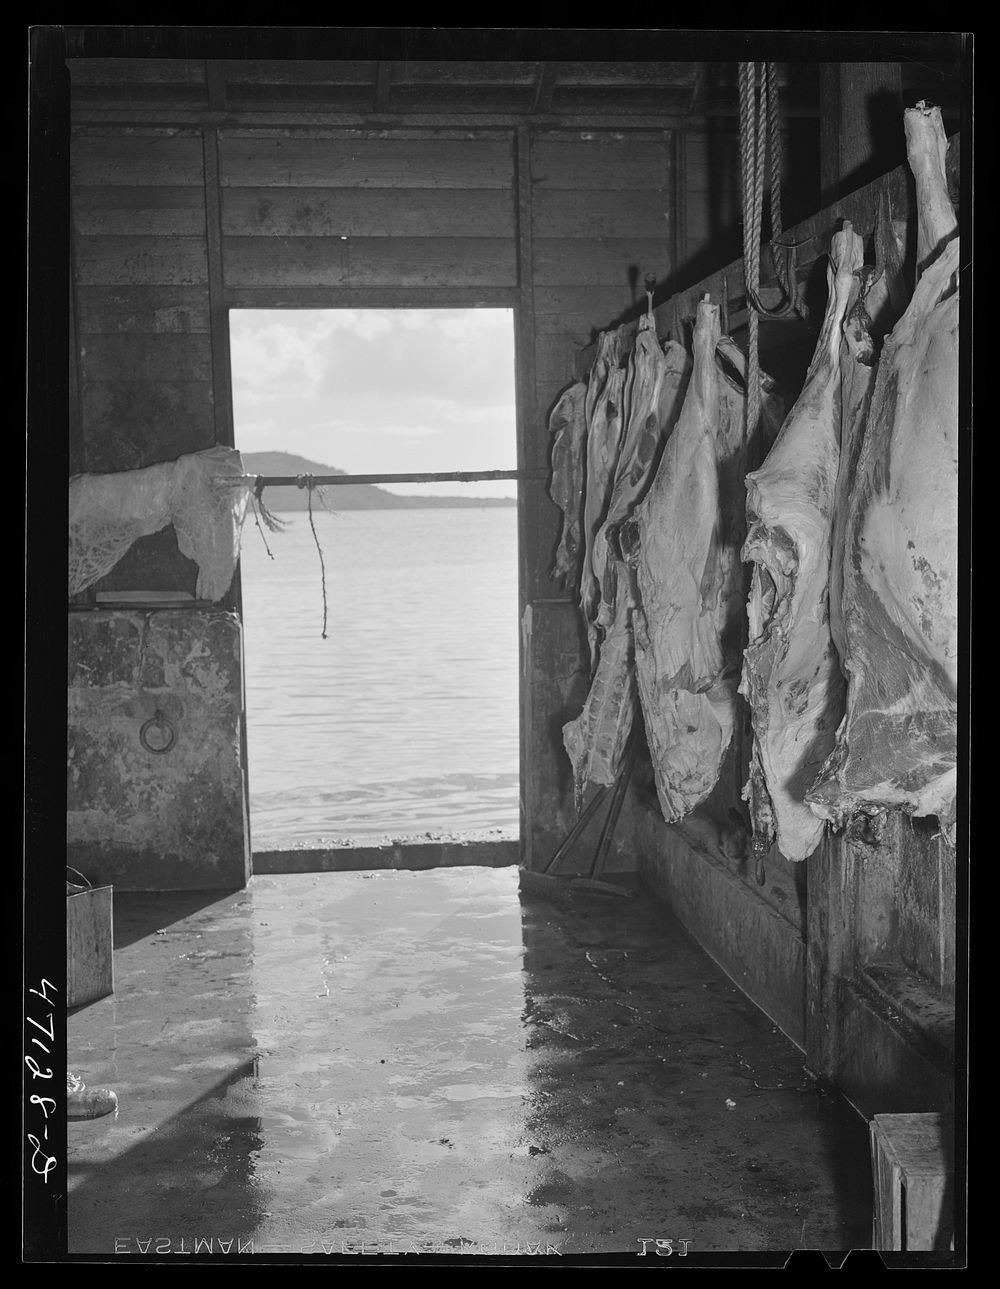 [Untitled photo, possibly related to: Charlotte Amalie, Saint Thomas Island, Virgin Islands. The slaughterhouse. In the…